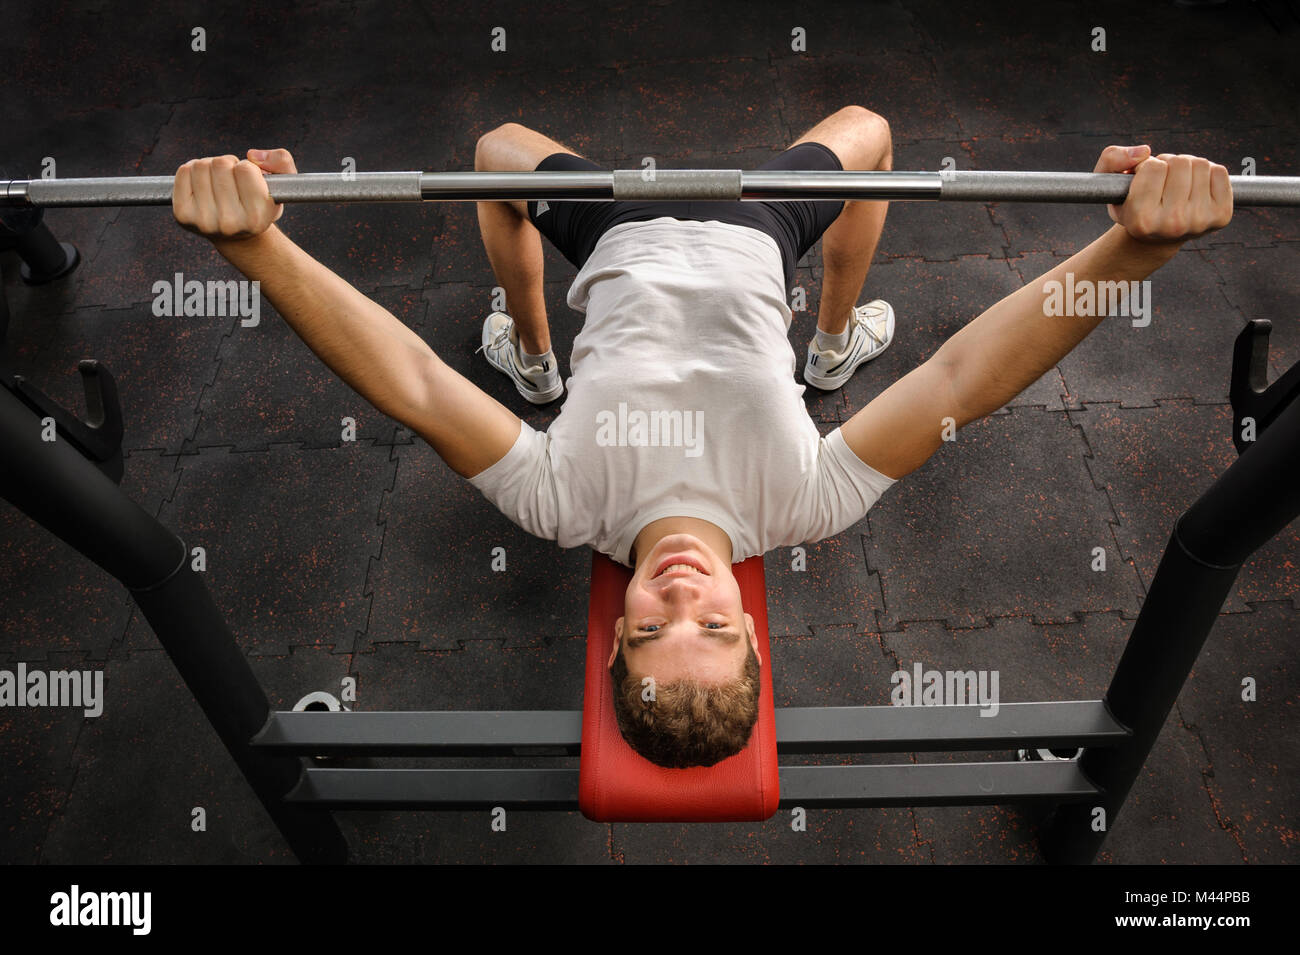 young man doing bench press workout in gym Stock Photo